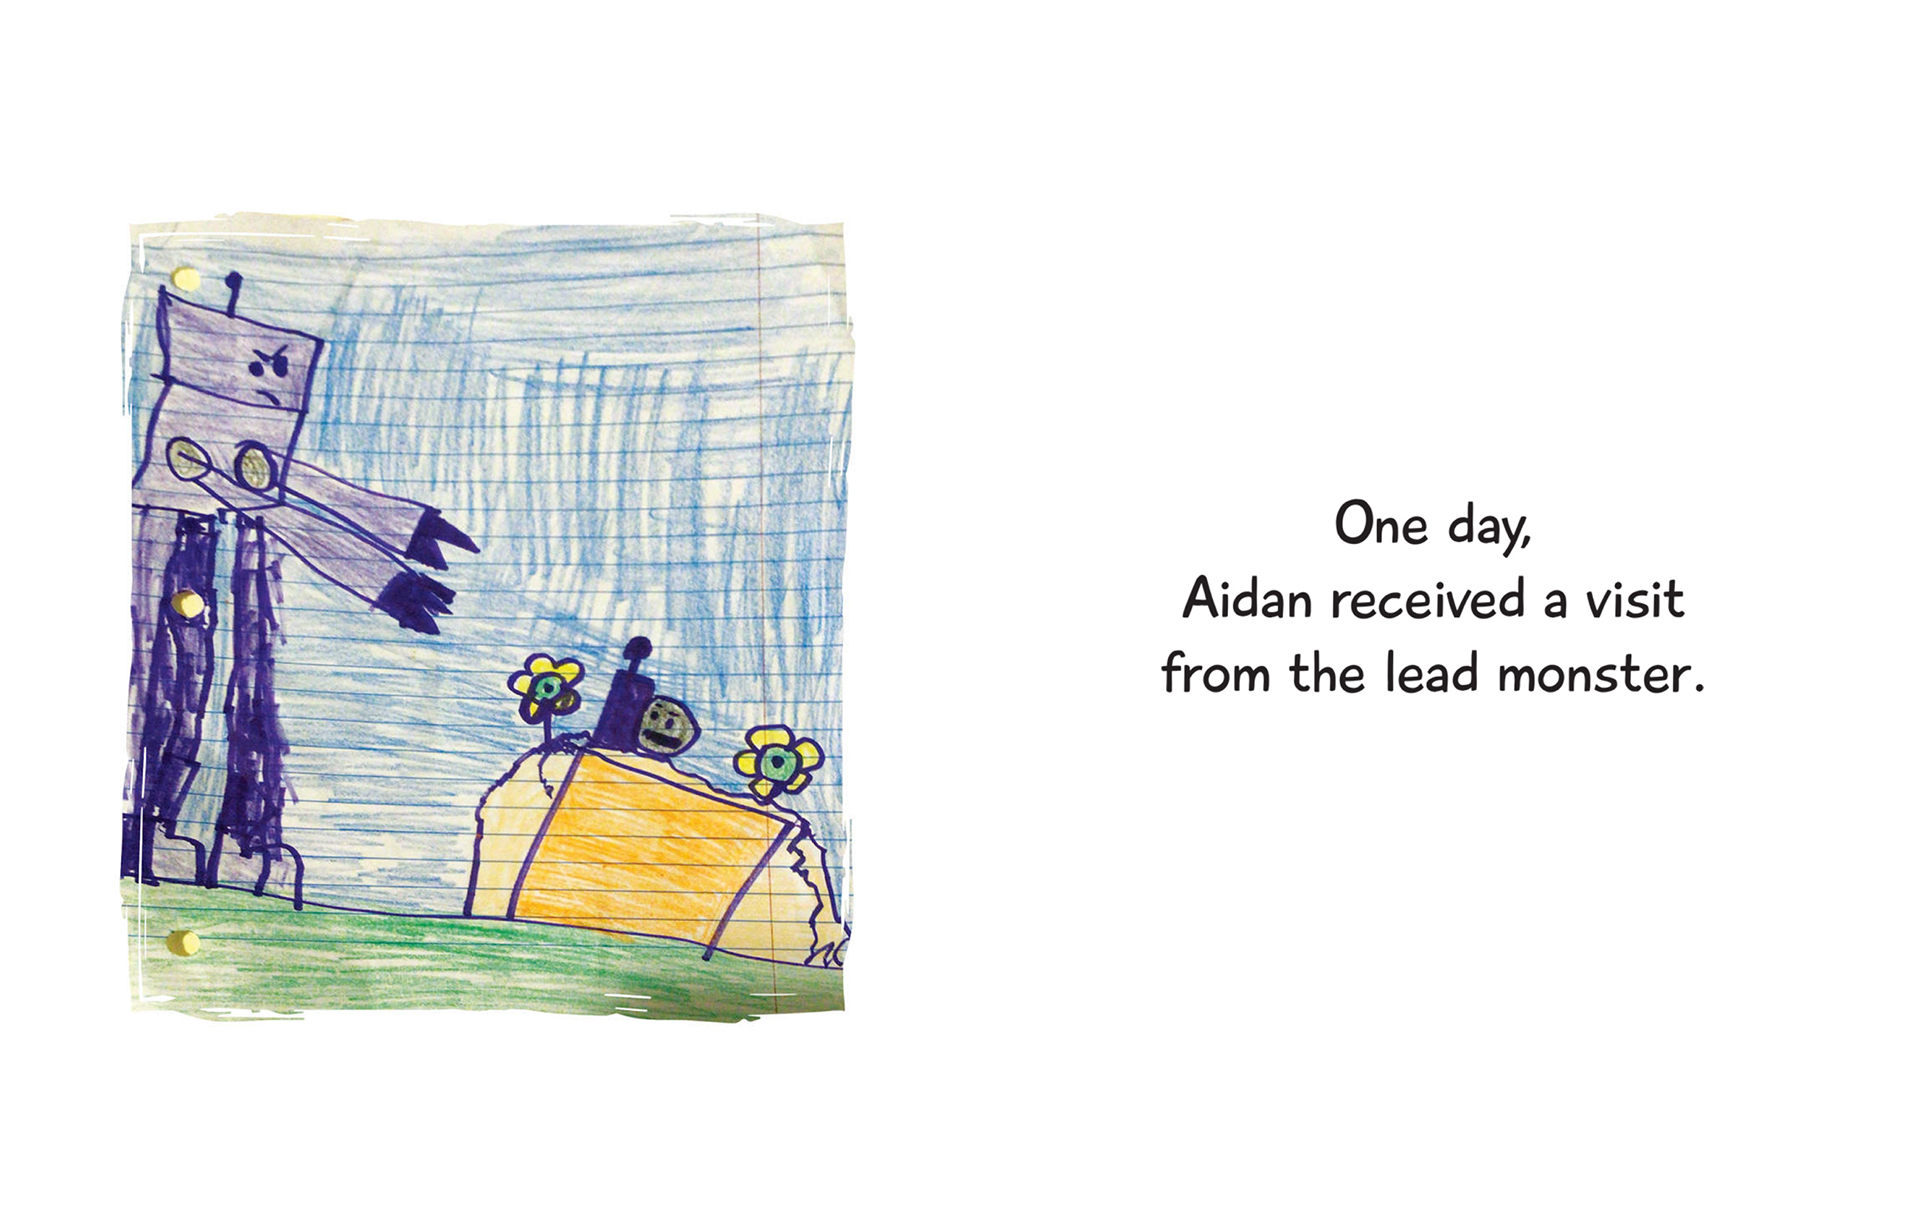 A book from a page shows an illustration on ruled paper alongside the text "One day, Aidan received a visit from the lead monster."